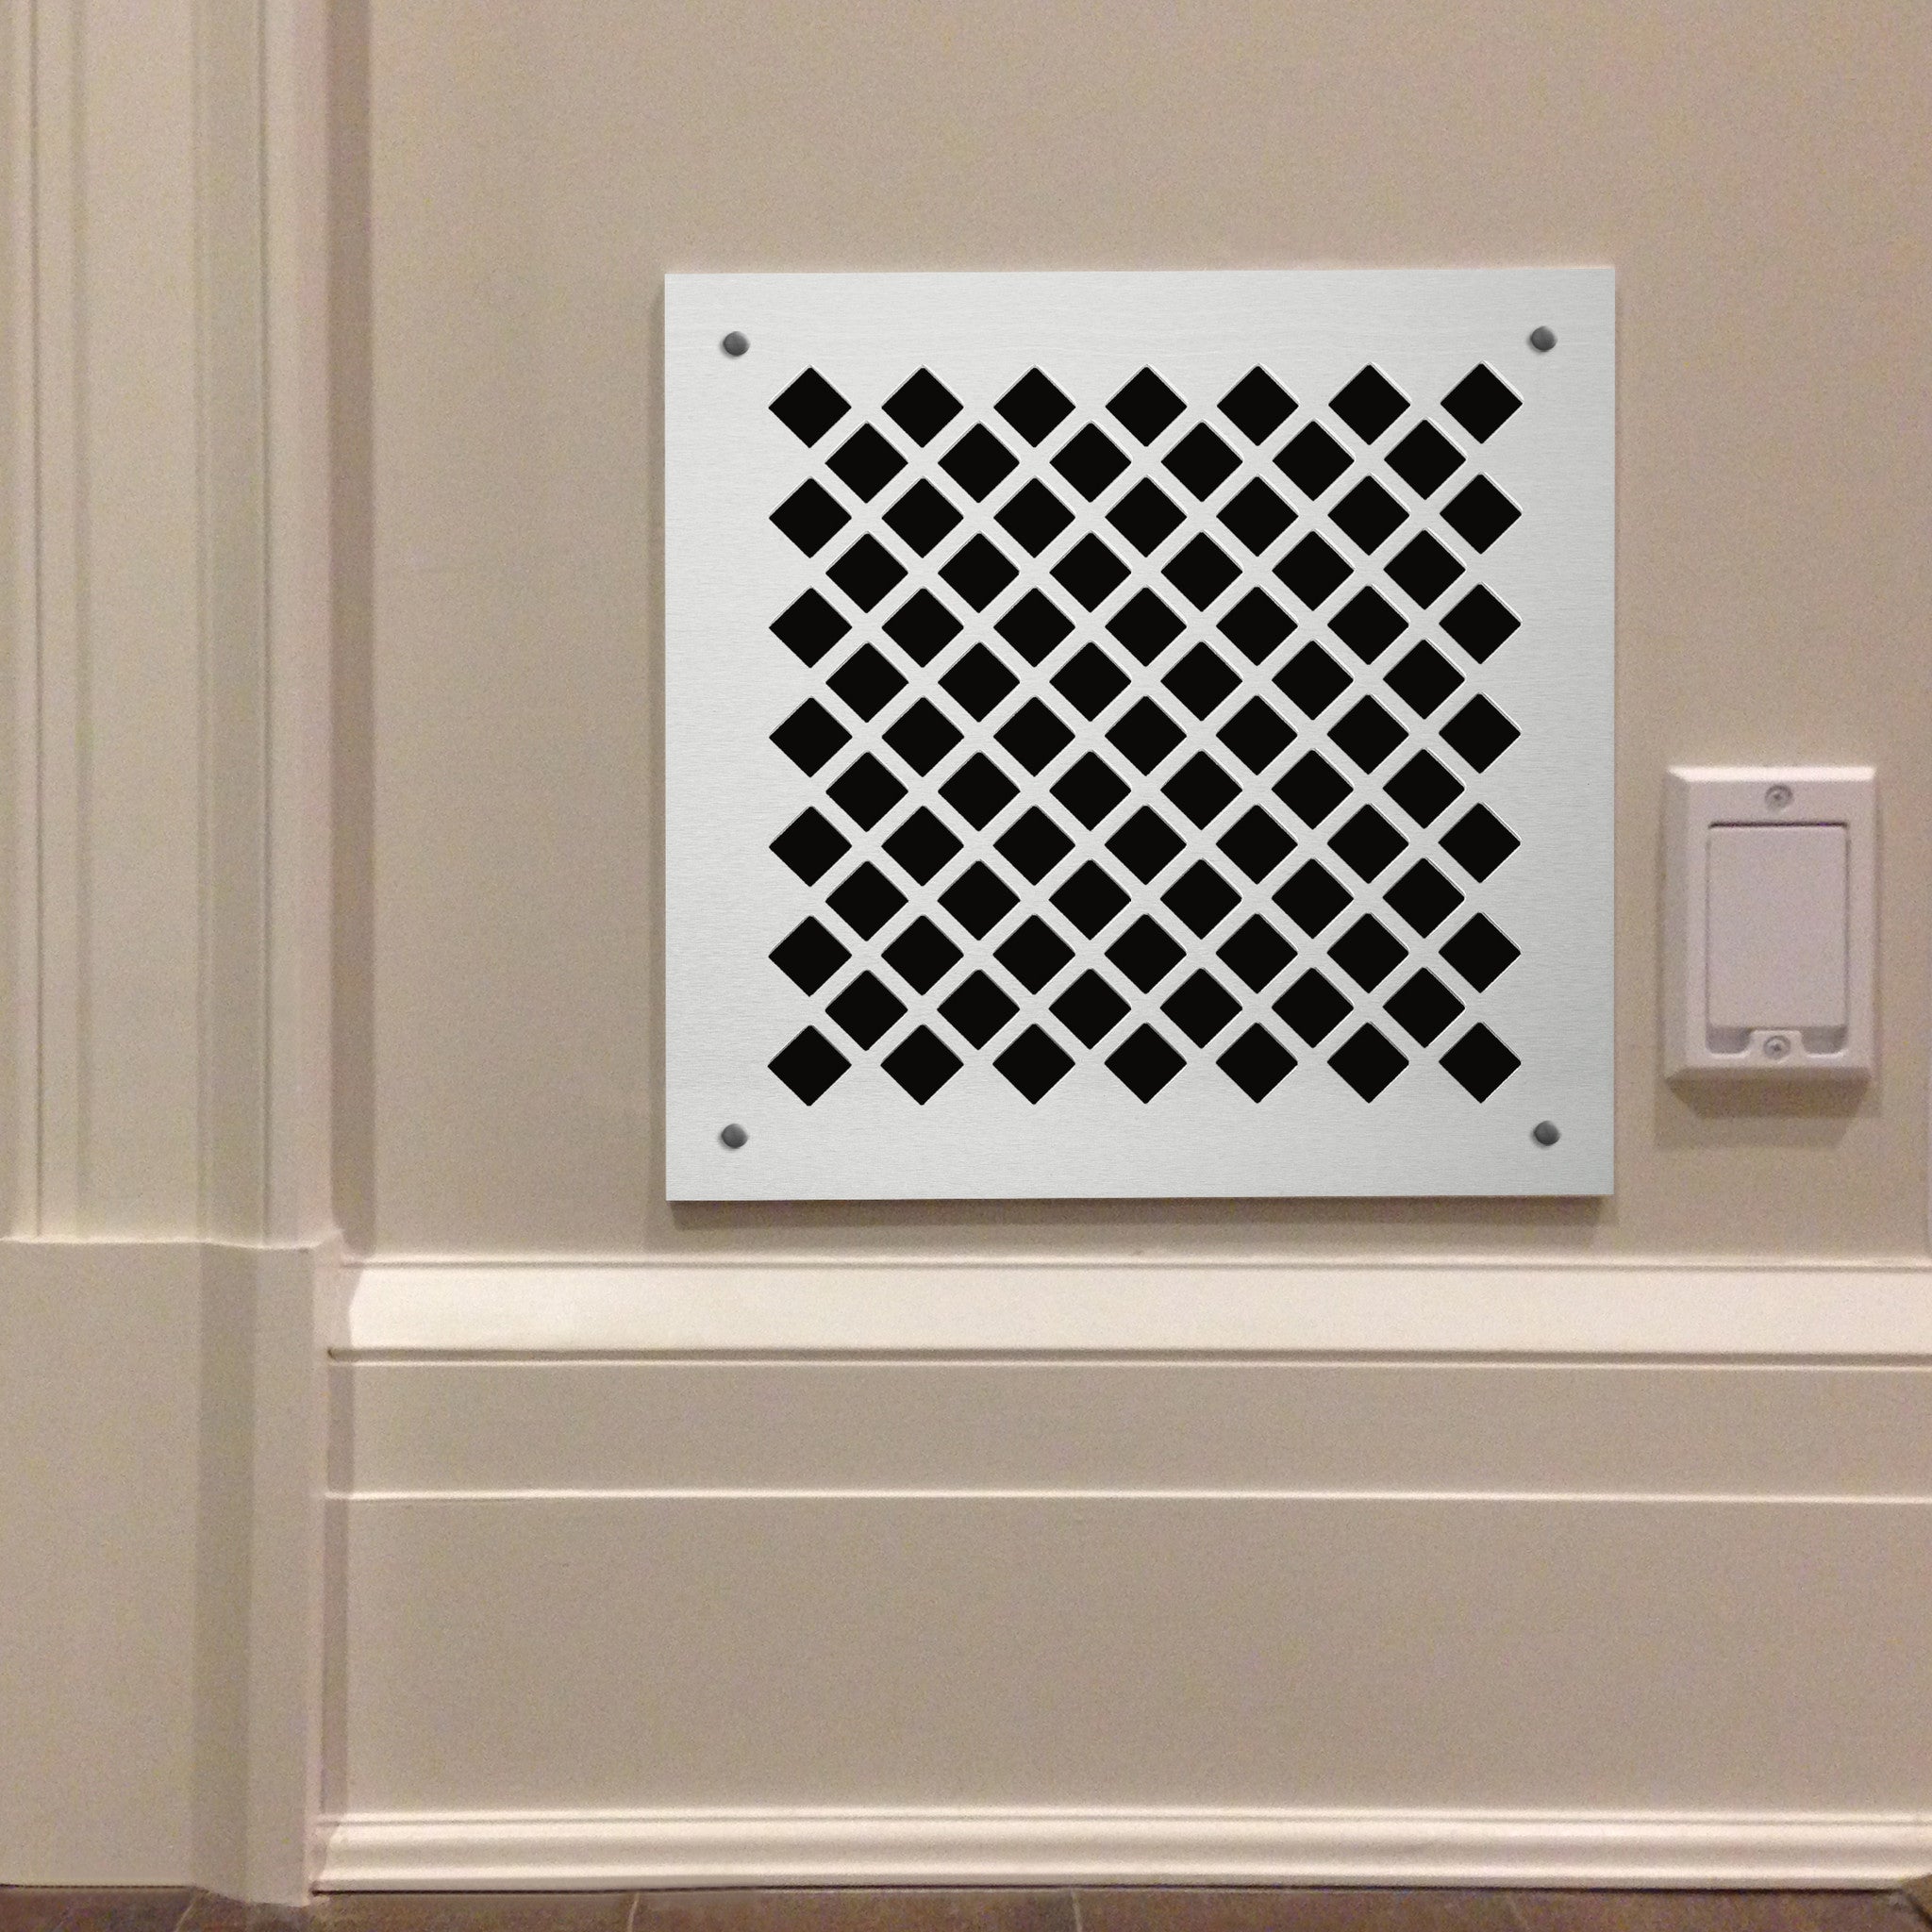 205 Diamond Perforated Grille: ½” with ¼” bar - 45% open area